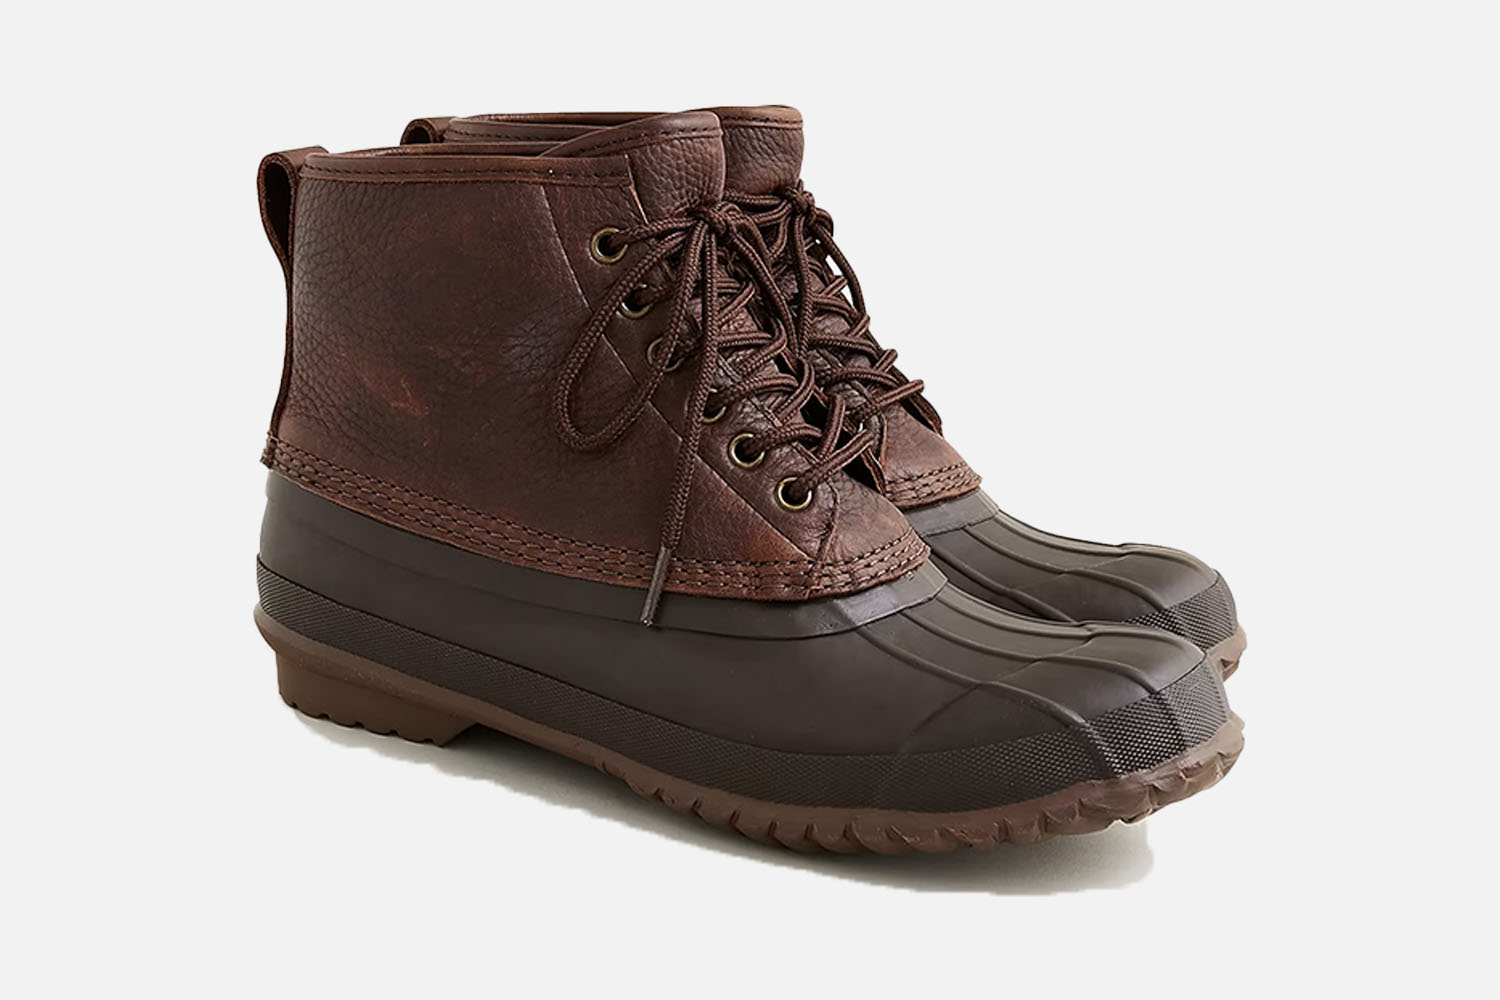 J.Crew Heritage Quilted Duck Boots